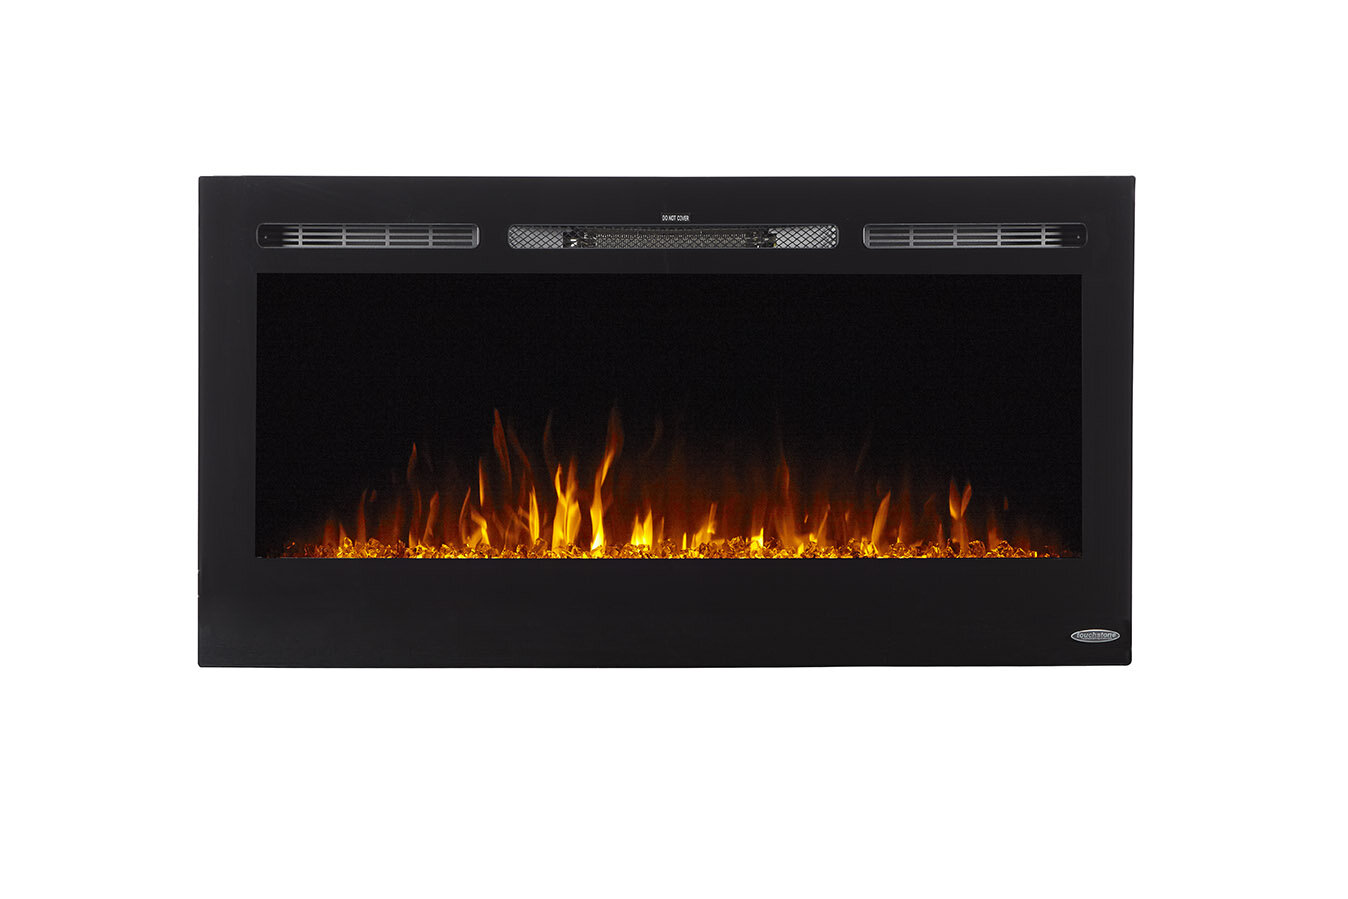 annetta recessed wall mounted electric fireplace